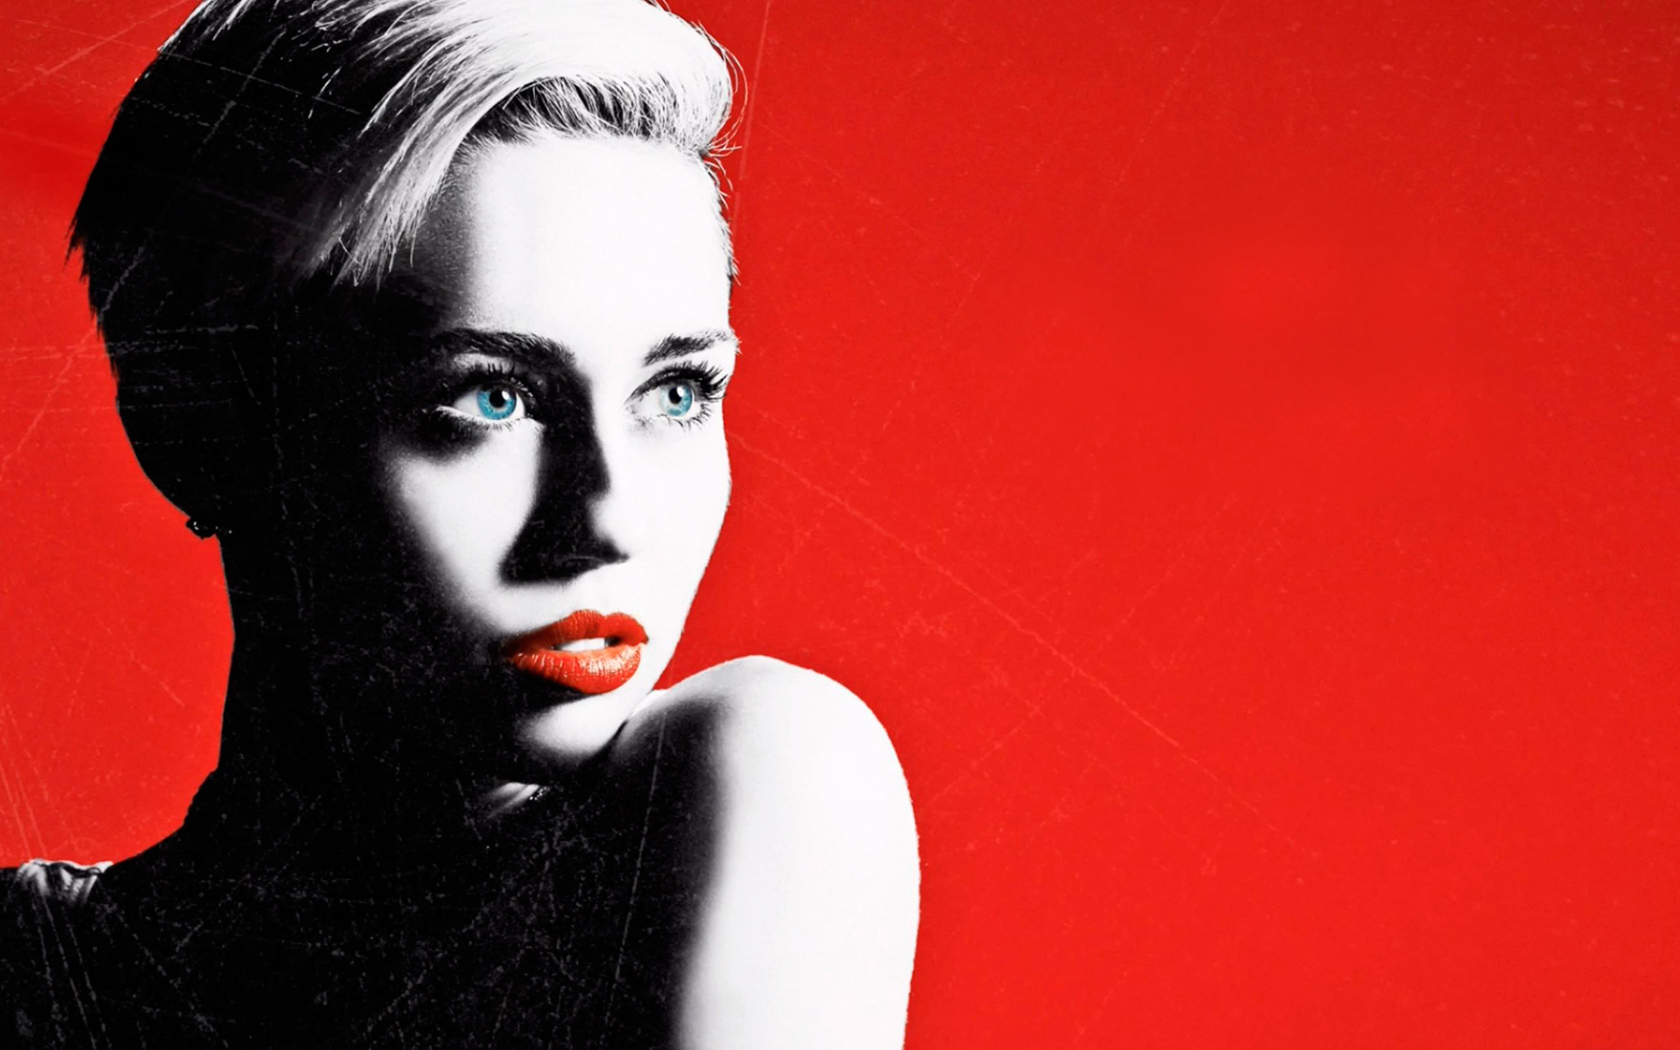 3. "MP3" by Miley Cyrus - wide 9